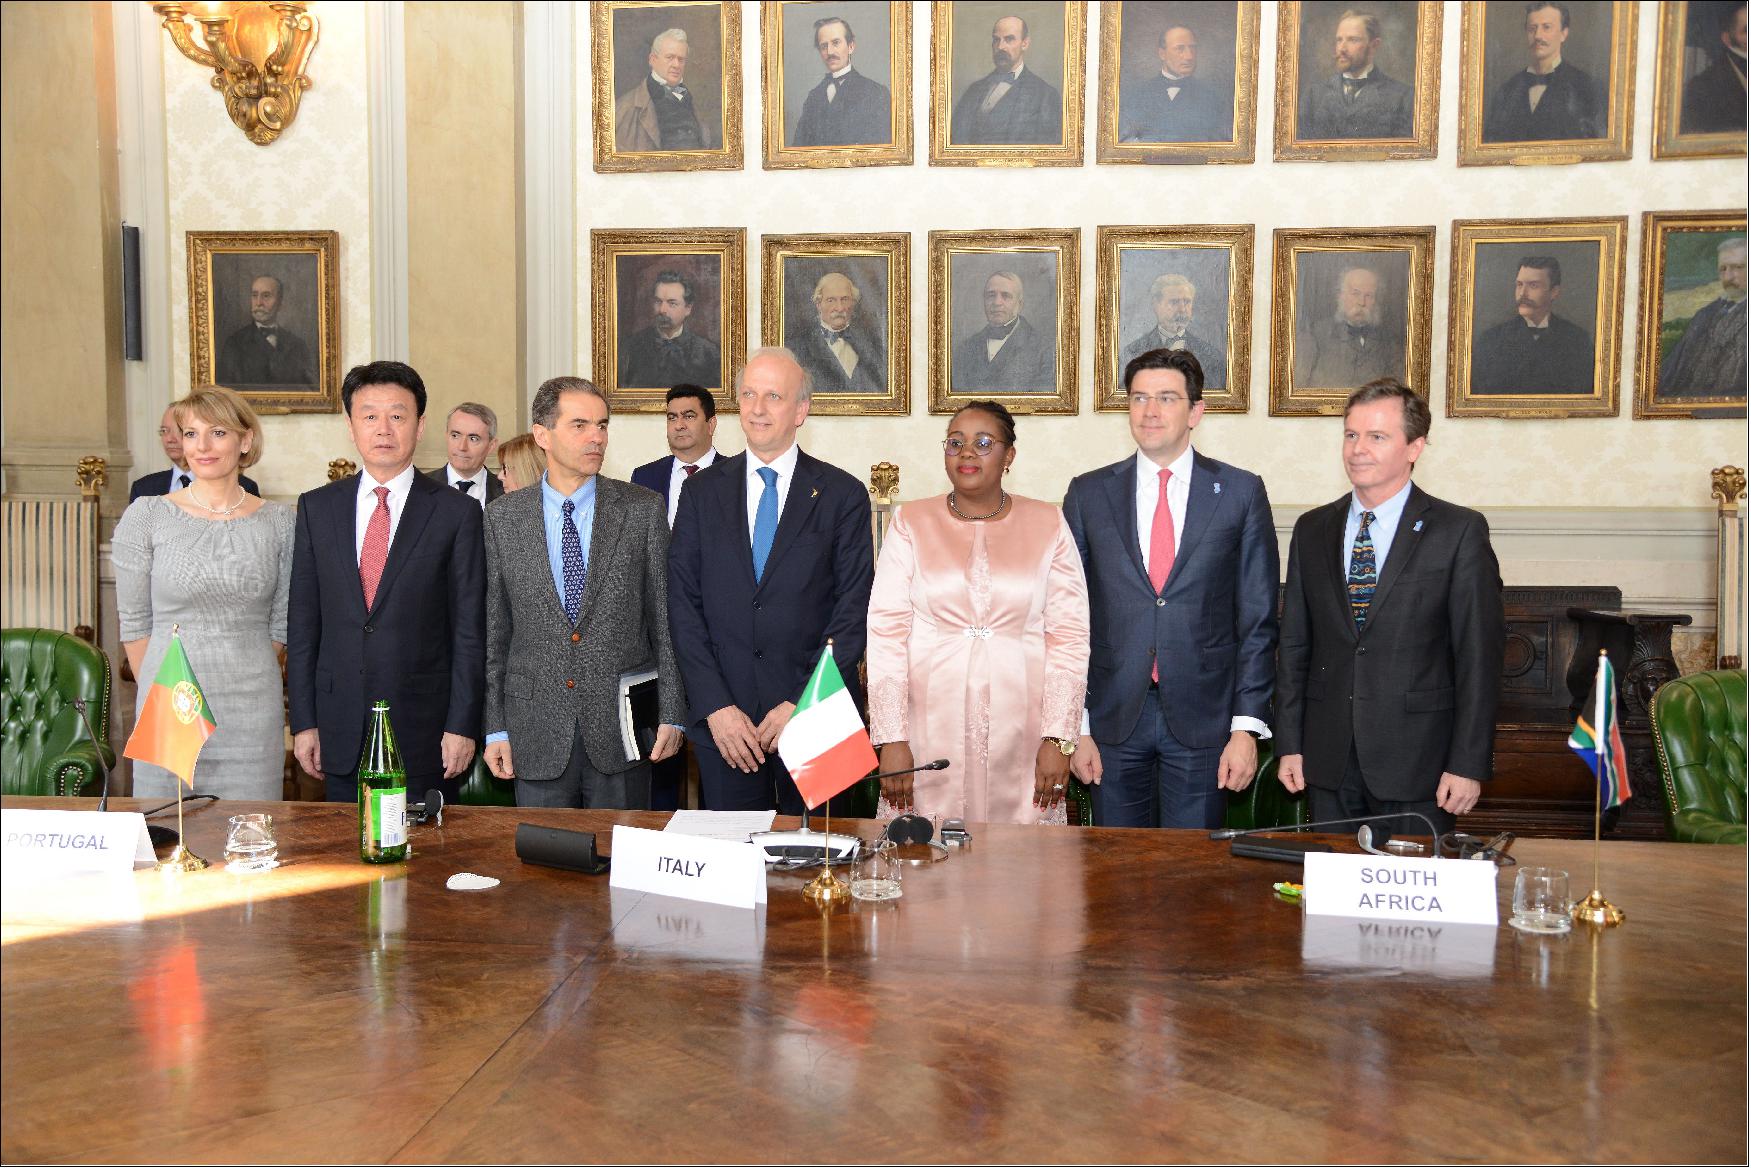 Figure 24: The initial signatories of the SKA Observatory Convention. From left to right: UK Ambassador to Italy Jill Morris, China’s Vice Minister of Science and Technology Jianguo Zhang, Portugal’s Minister for Science, Technology and Higher Education Manuel Heitor, Italian Minister of Education, Universities and Research Marco Bussetti, South Africa’s Minister of Science and Technology Mmamoloko Kubayi-Ngubane, the Netherlands Deputy Director of the Department for Science and Research Policy at the Ministry of Education, Culture and Science Oscar Delnooz, and Australia’s Ambassador to Italy Greg French (image credit: SKA Organization)